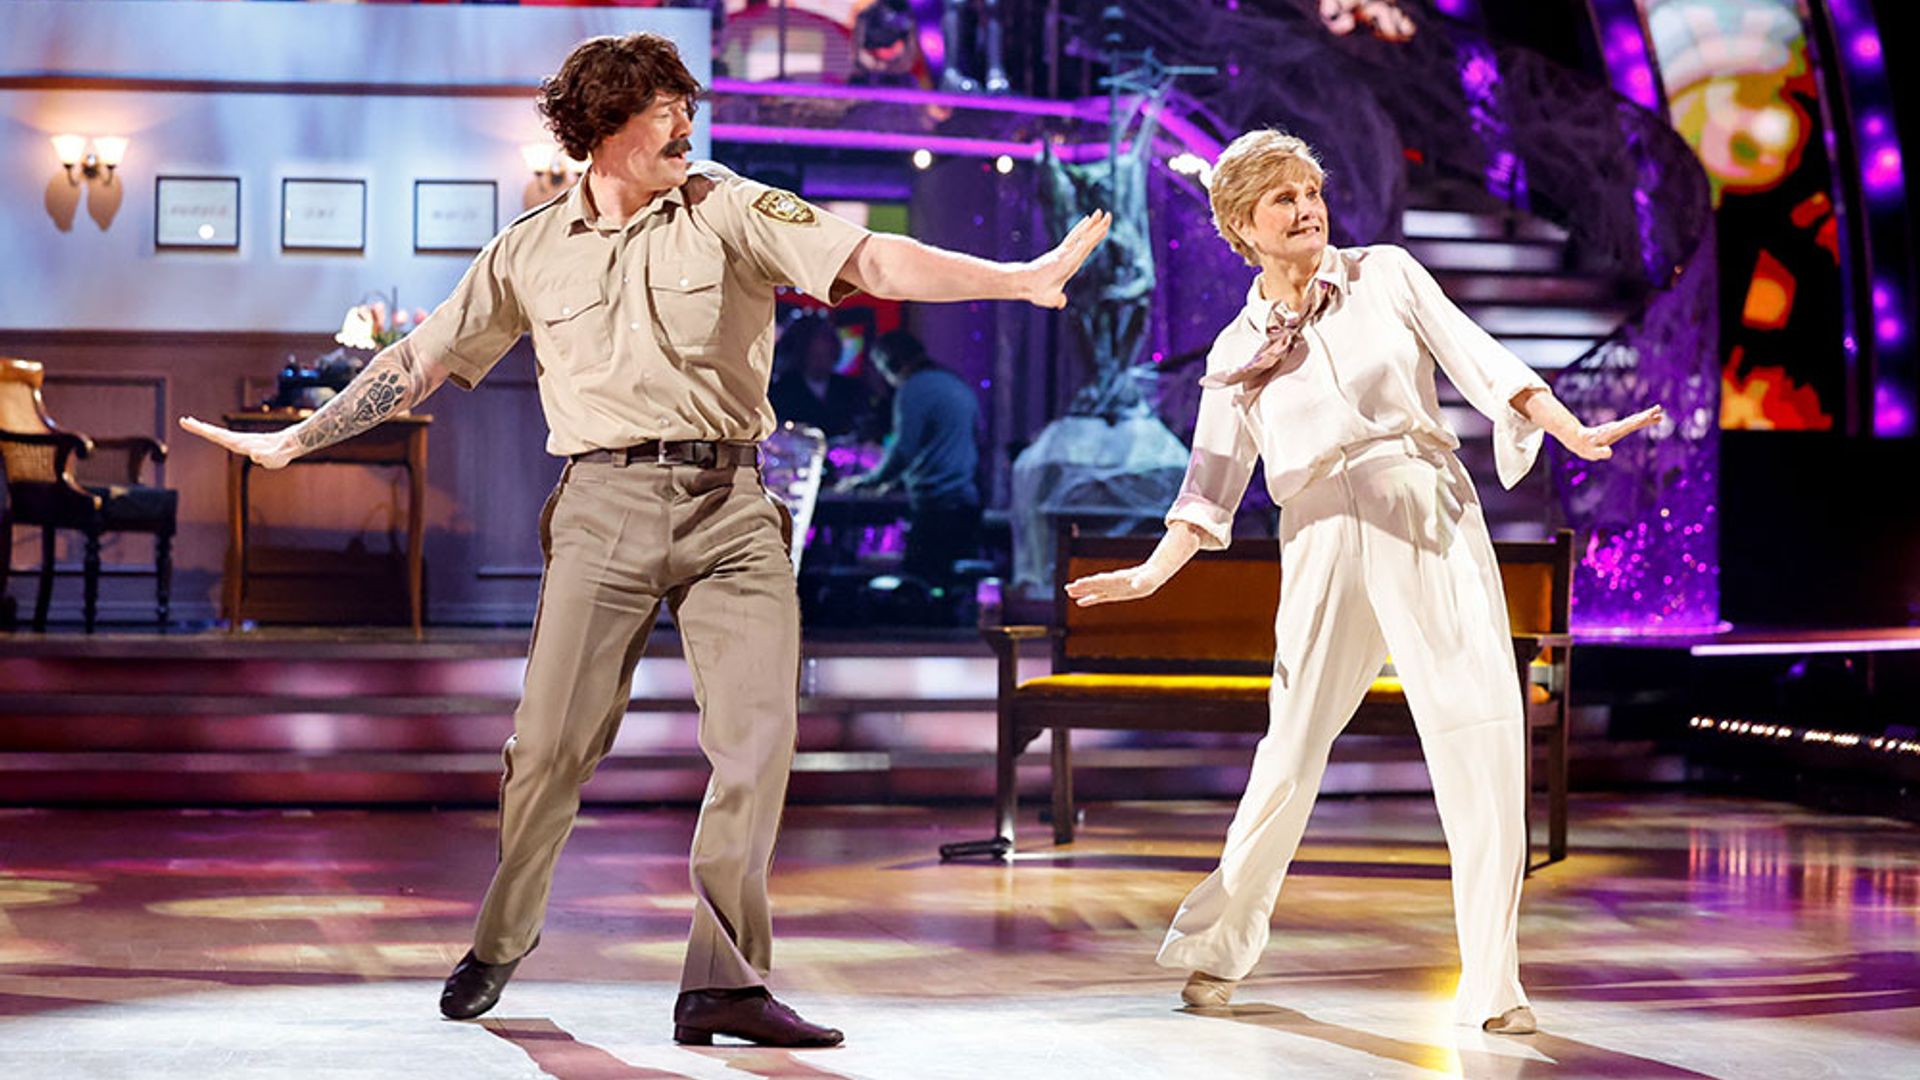 Angela Rippon and Kai Widdrington performing the Charleston to the theme of Murder She Wrote